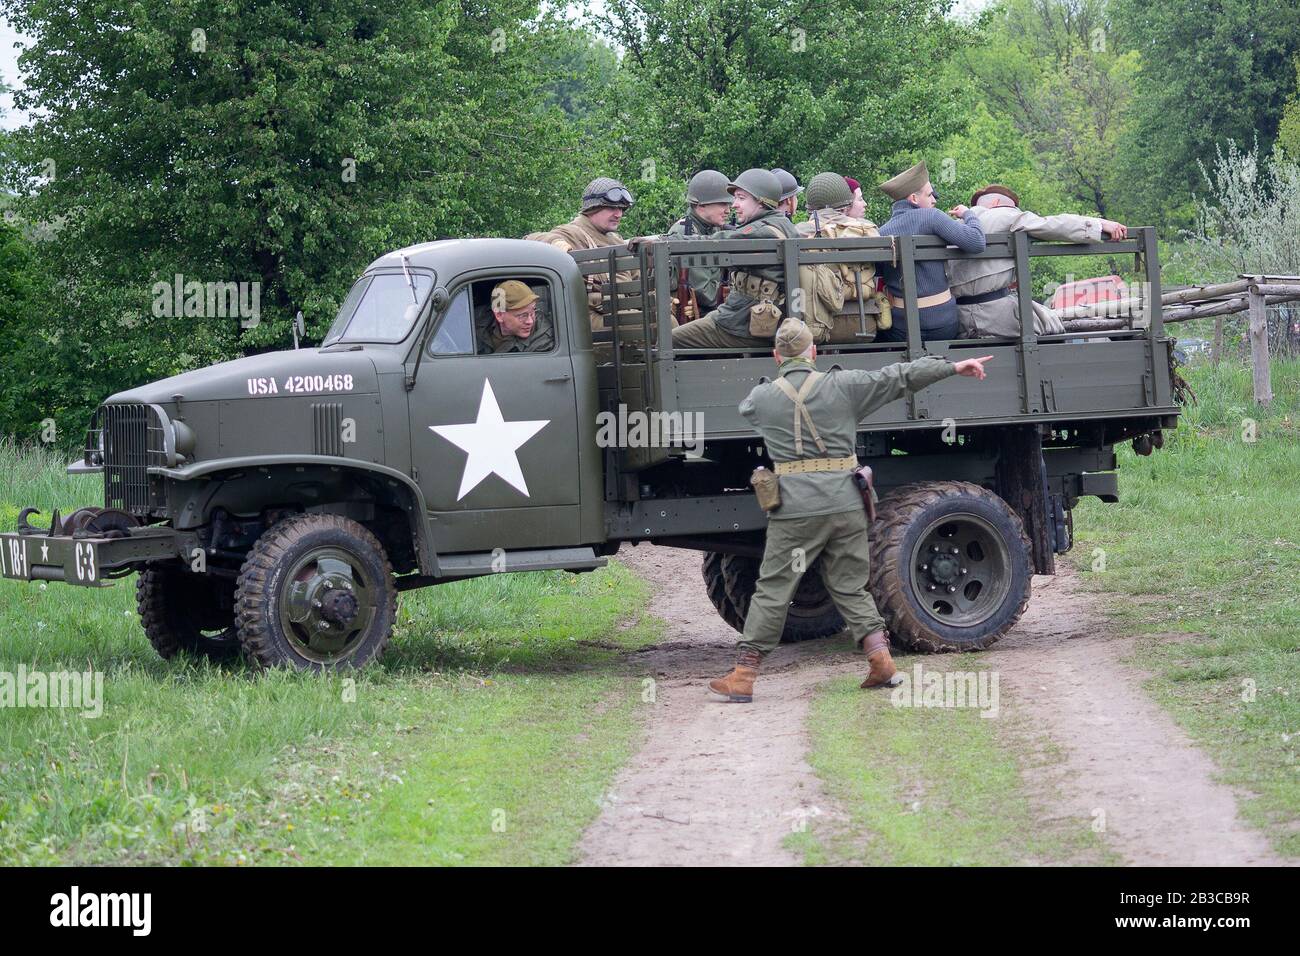 Kiev, Ukraine - May 9, 2019: Peoples in the form of US Army soldier of the Second World War on a truck on the historical reconstruction of the anniver Stock Photo